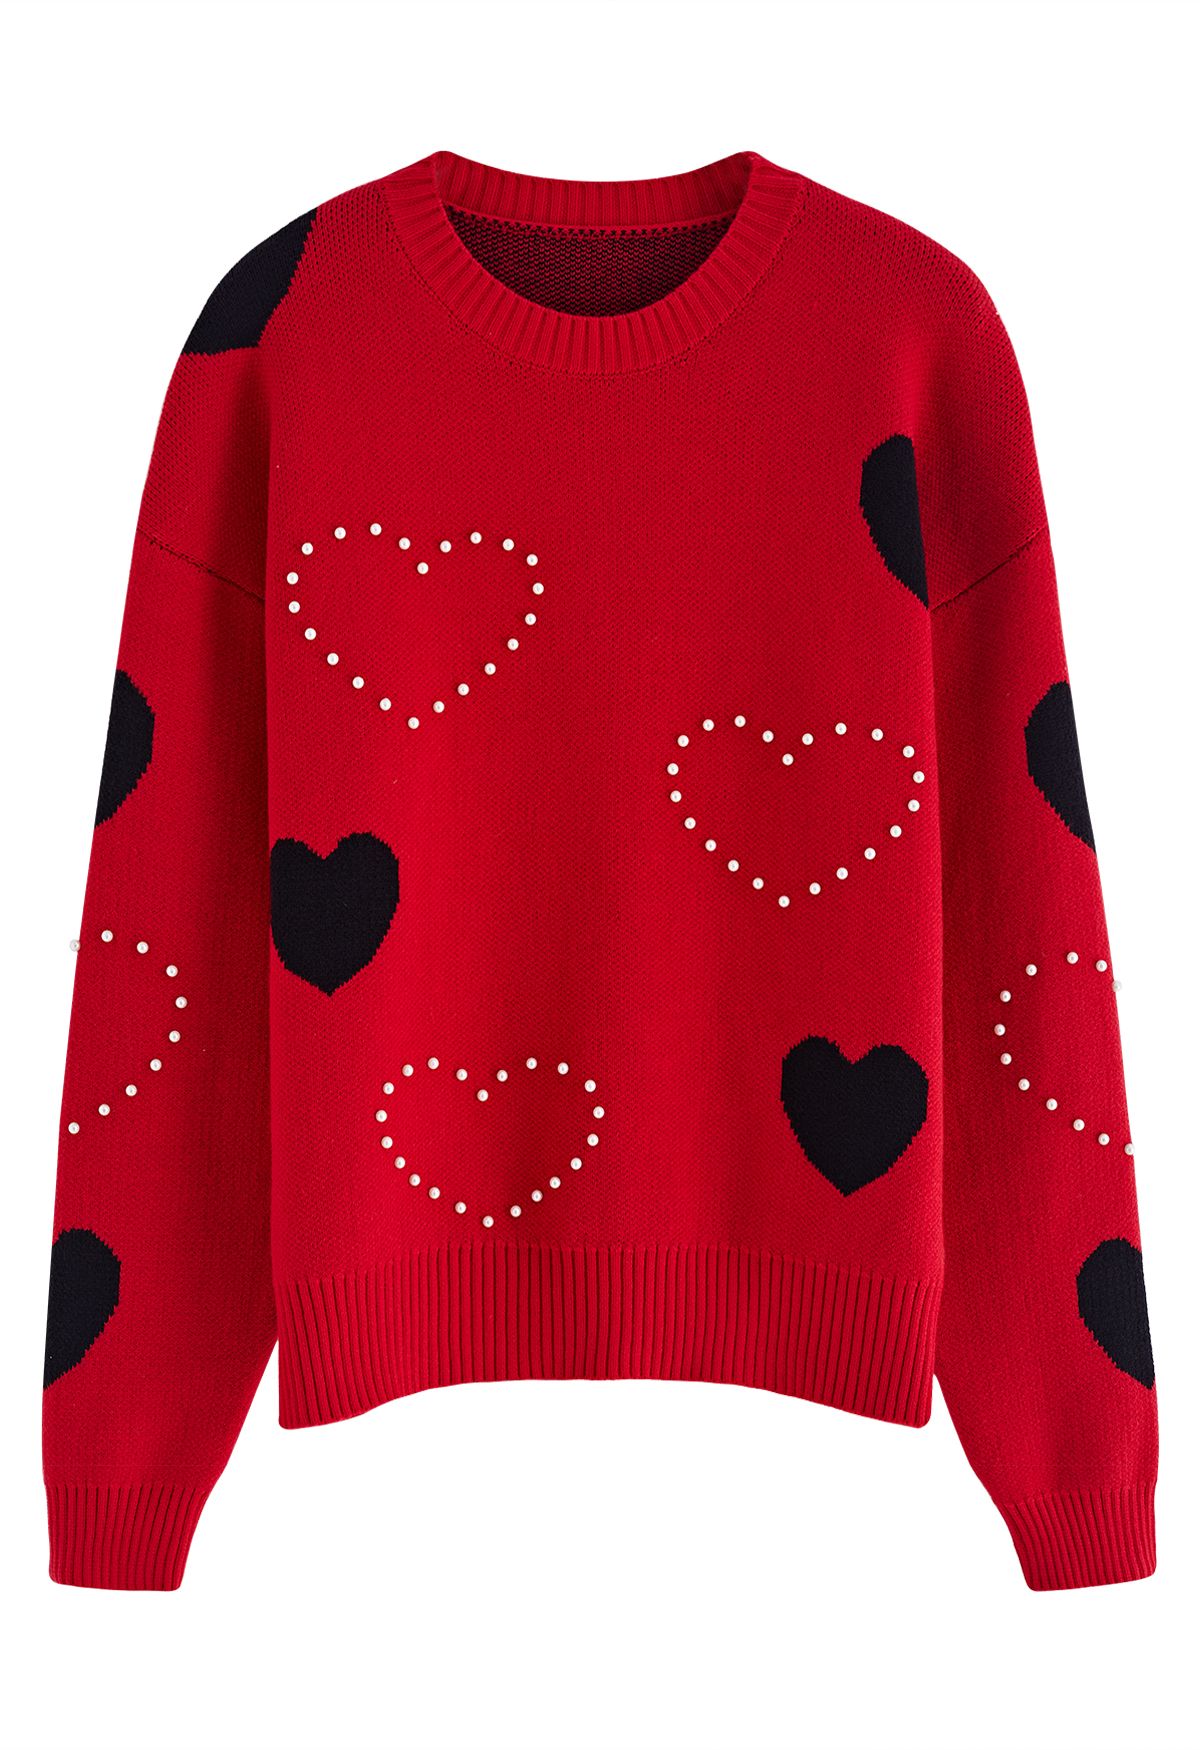 Chic wish Red heart sweater look